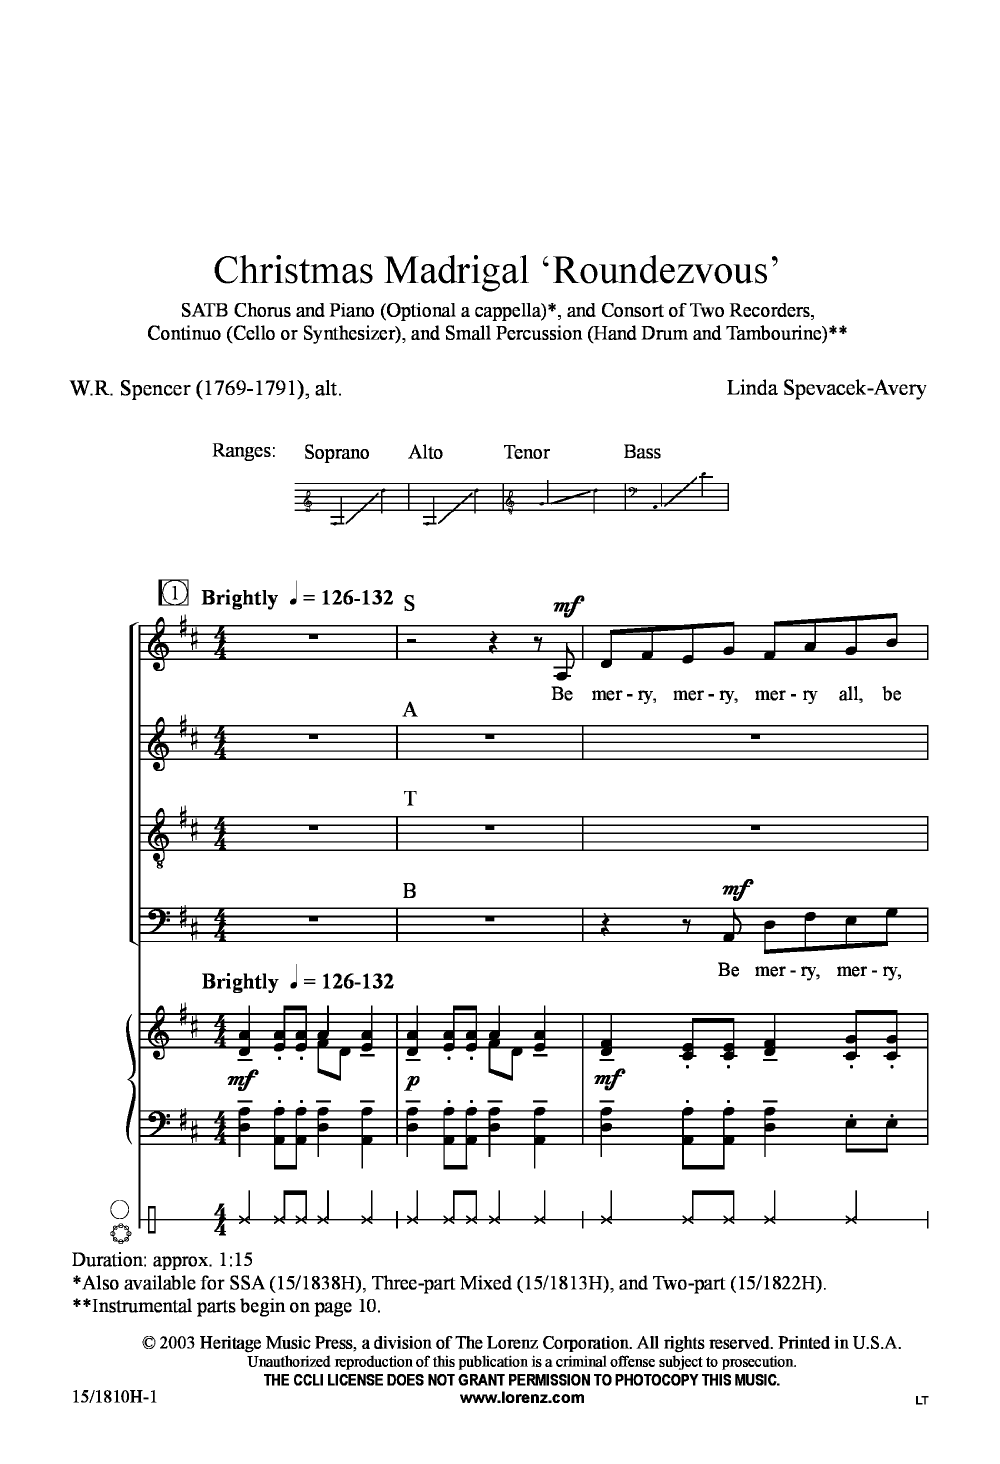 Christmas Madrigal Roundezvous